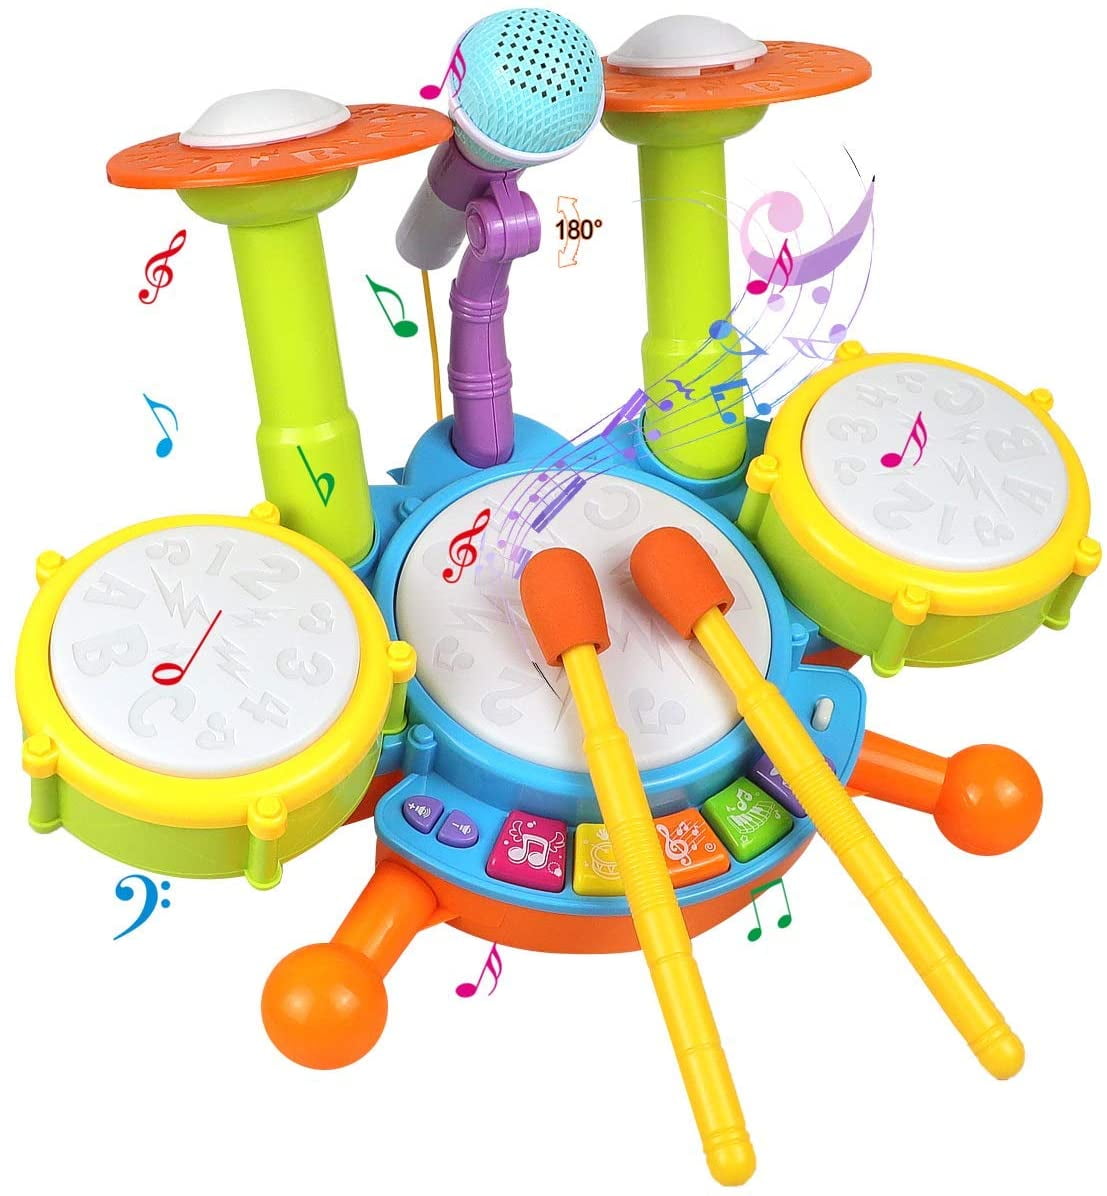 DecorX Kids Drum Set Toddler Toys with Adjustable Microphone, Musical